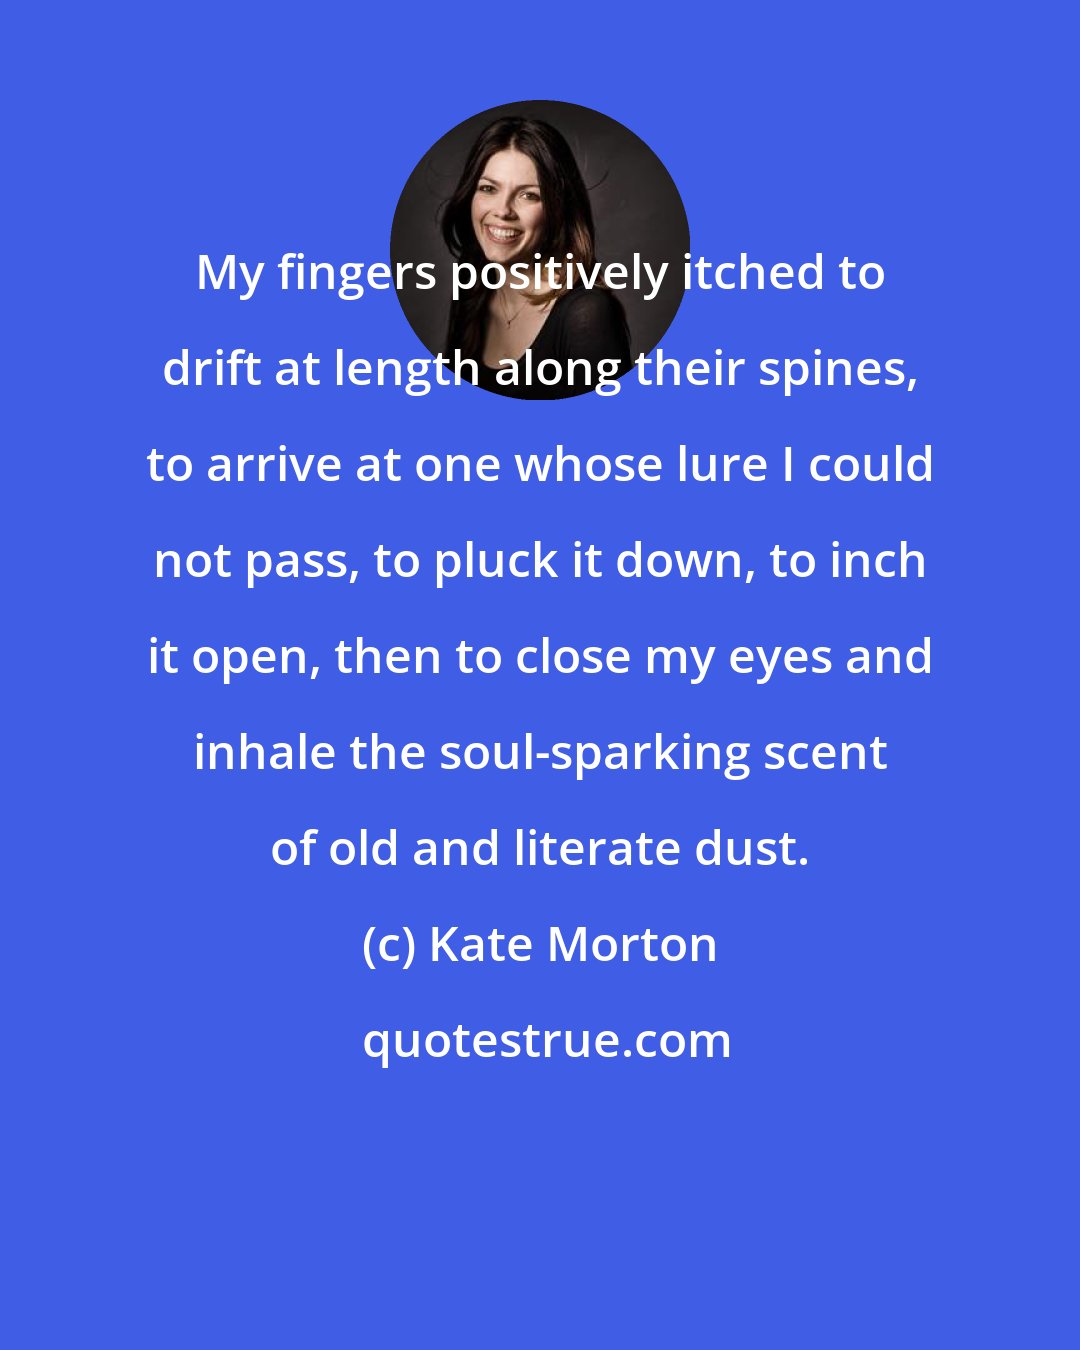 Kate Morton: My fingers positively itched to drift at length along their spines, to arrive at one whose lure I could not pass, to pluck it down, to inch it open, then to close my eyes and inhale the soul-sparking scent of old and literate dust.